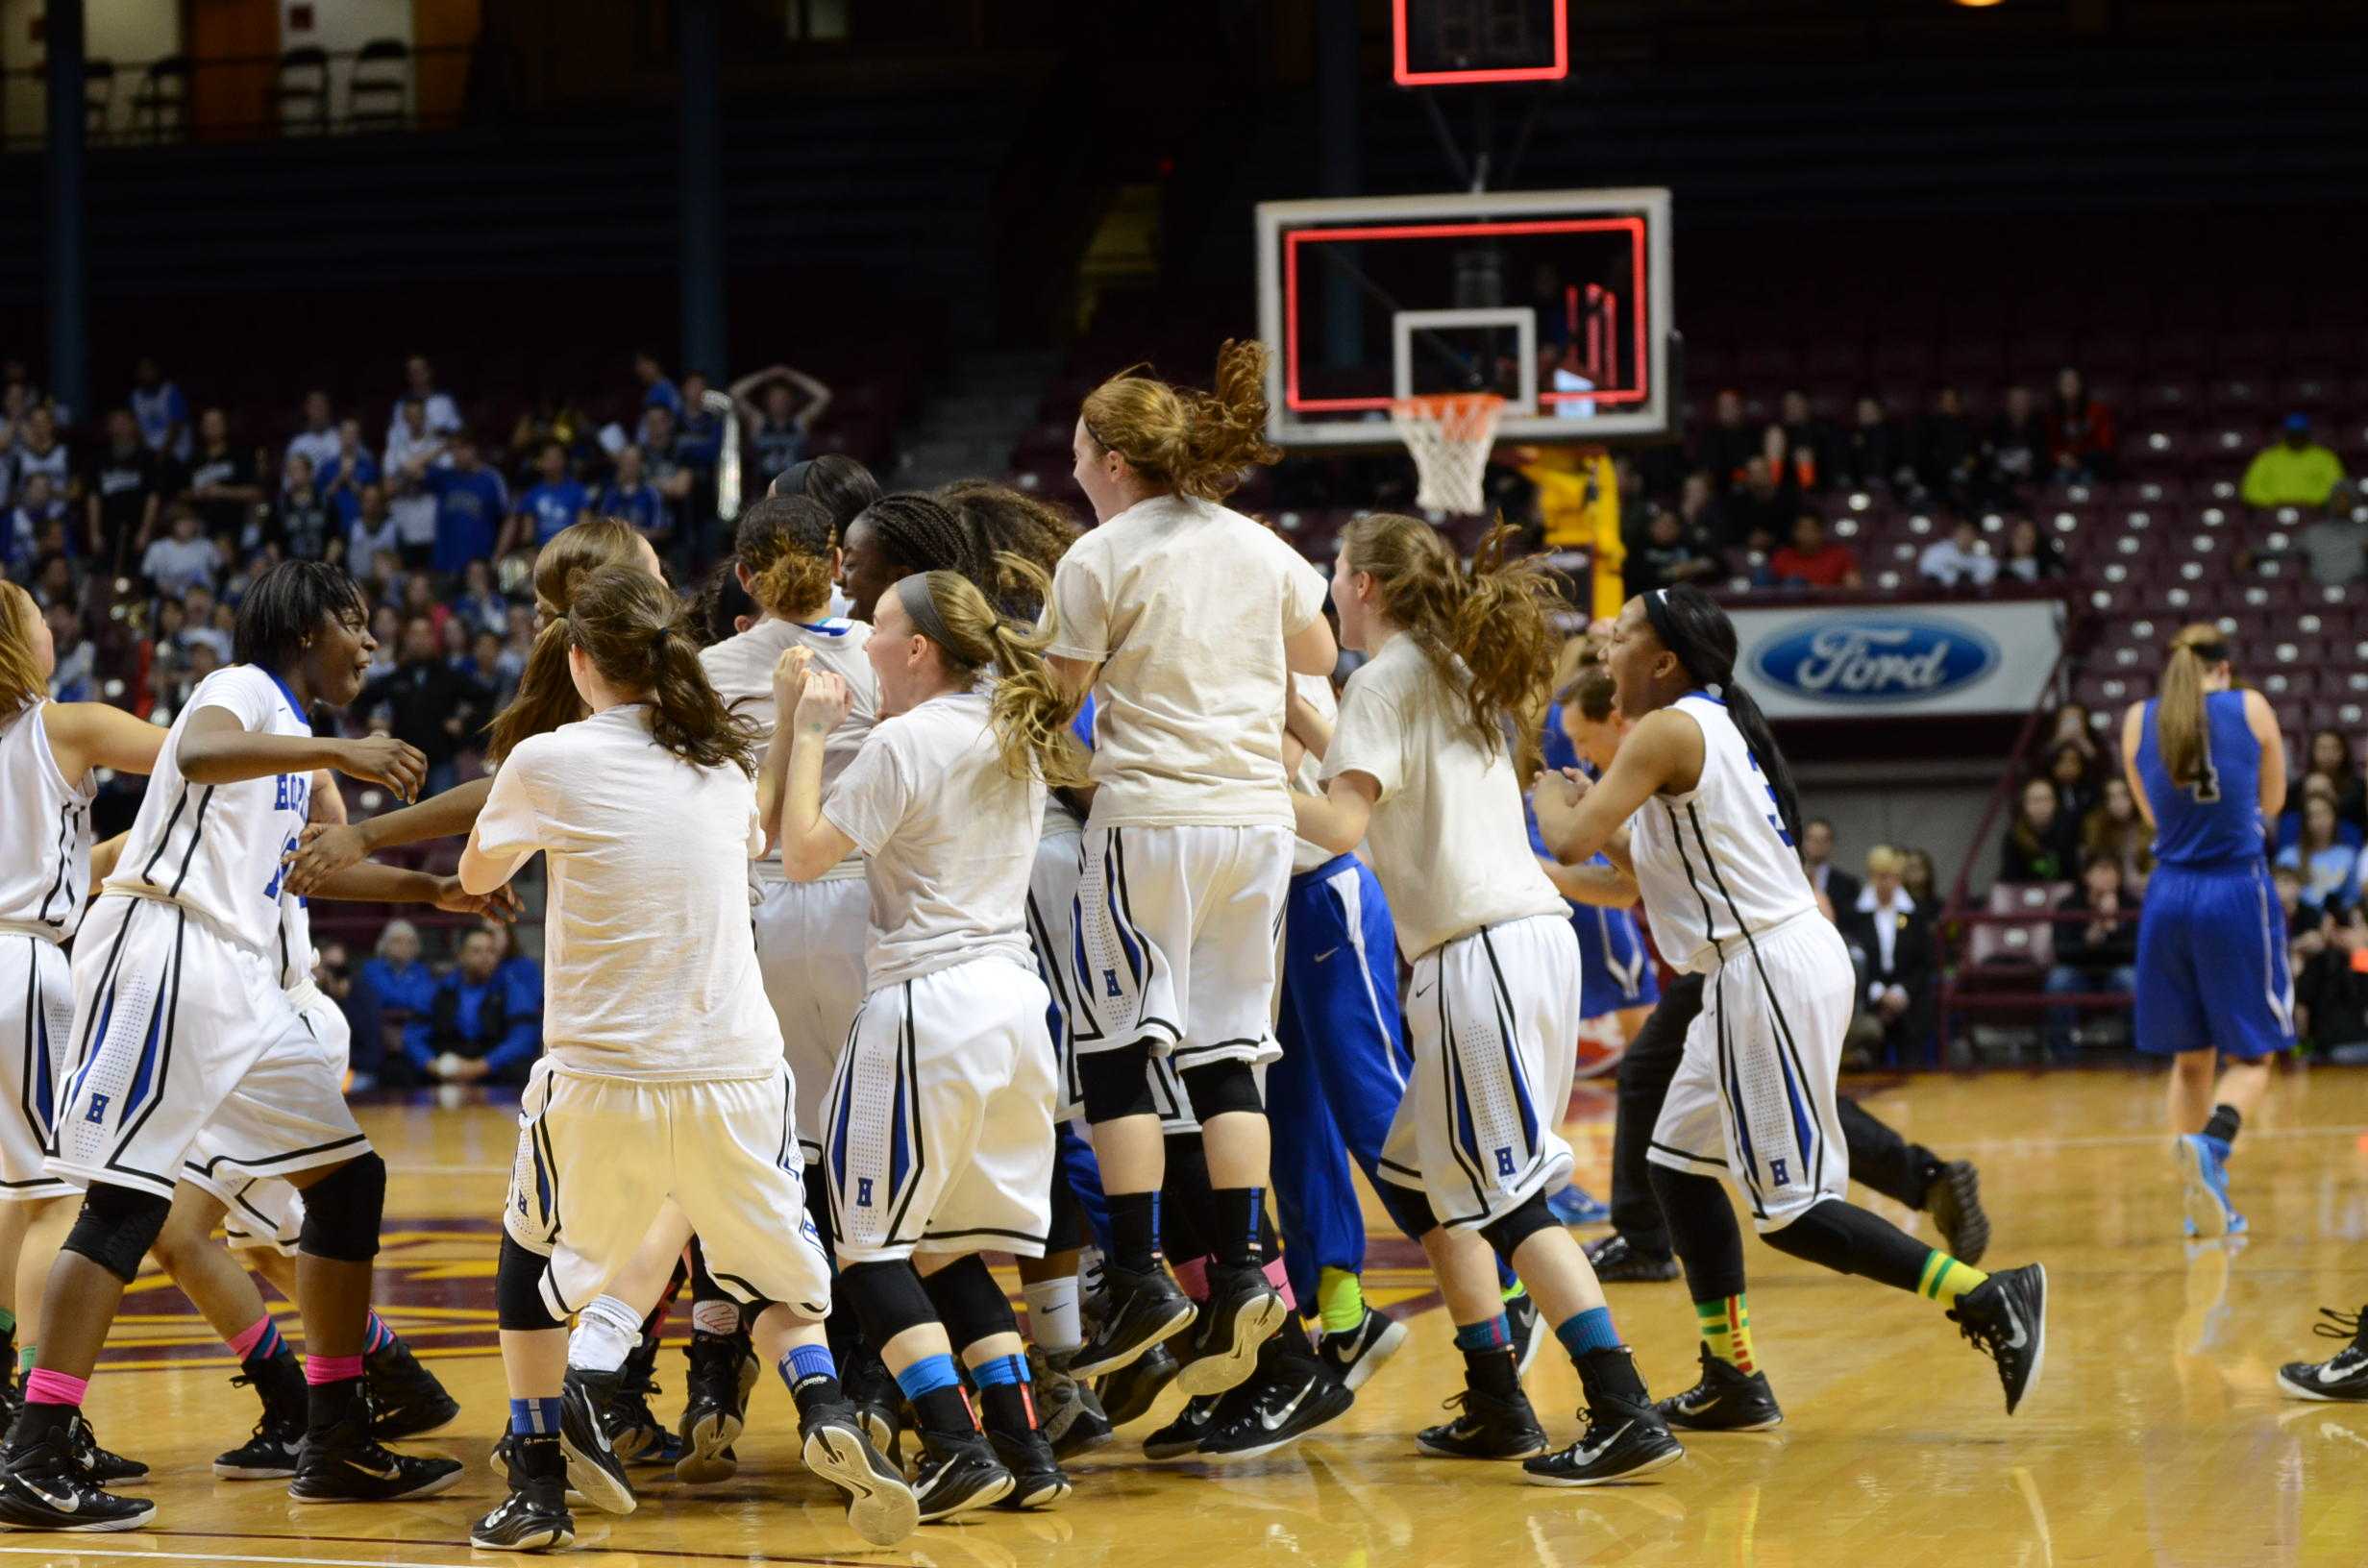 Royal-ty+reigns+again+as+girls+basketball+wins+state+championship